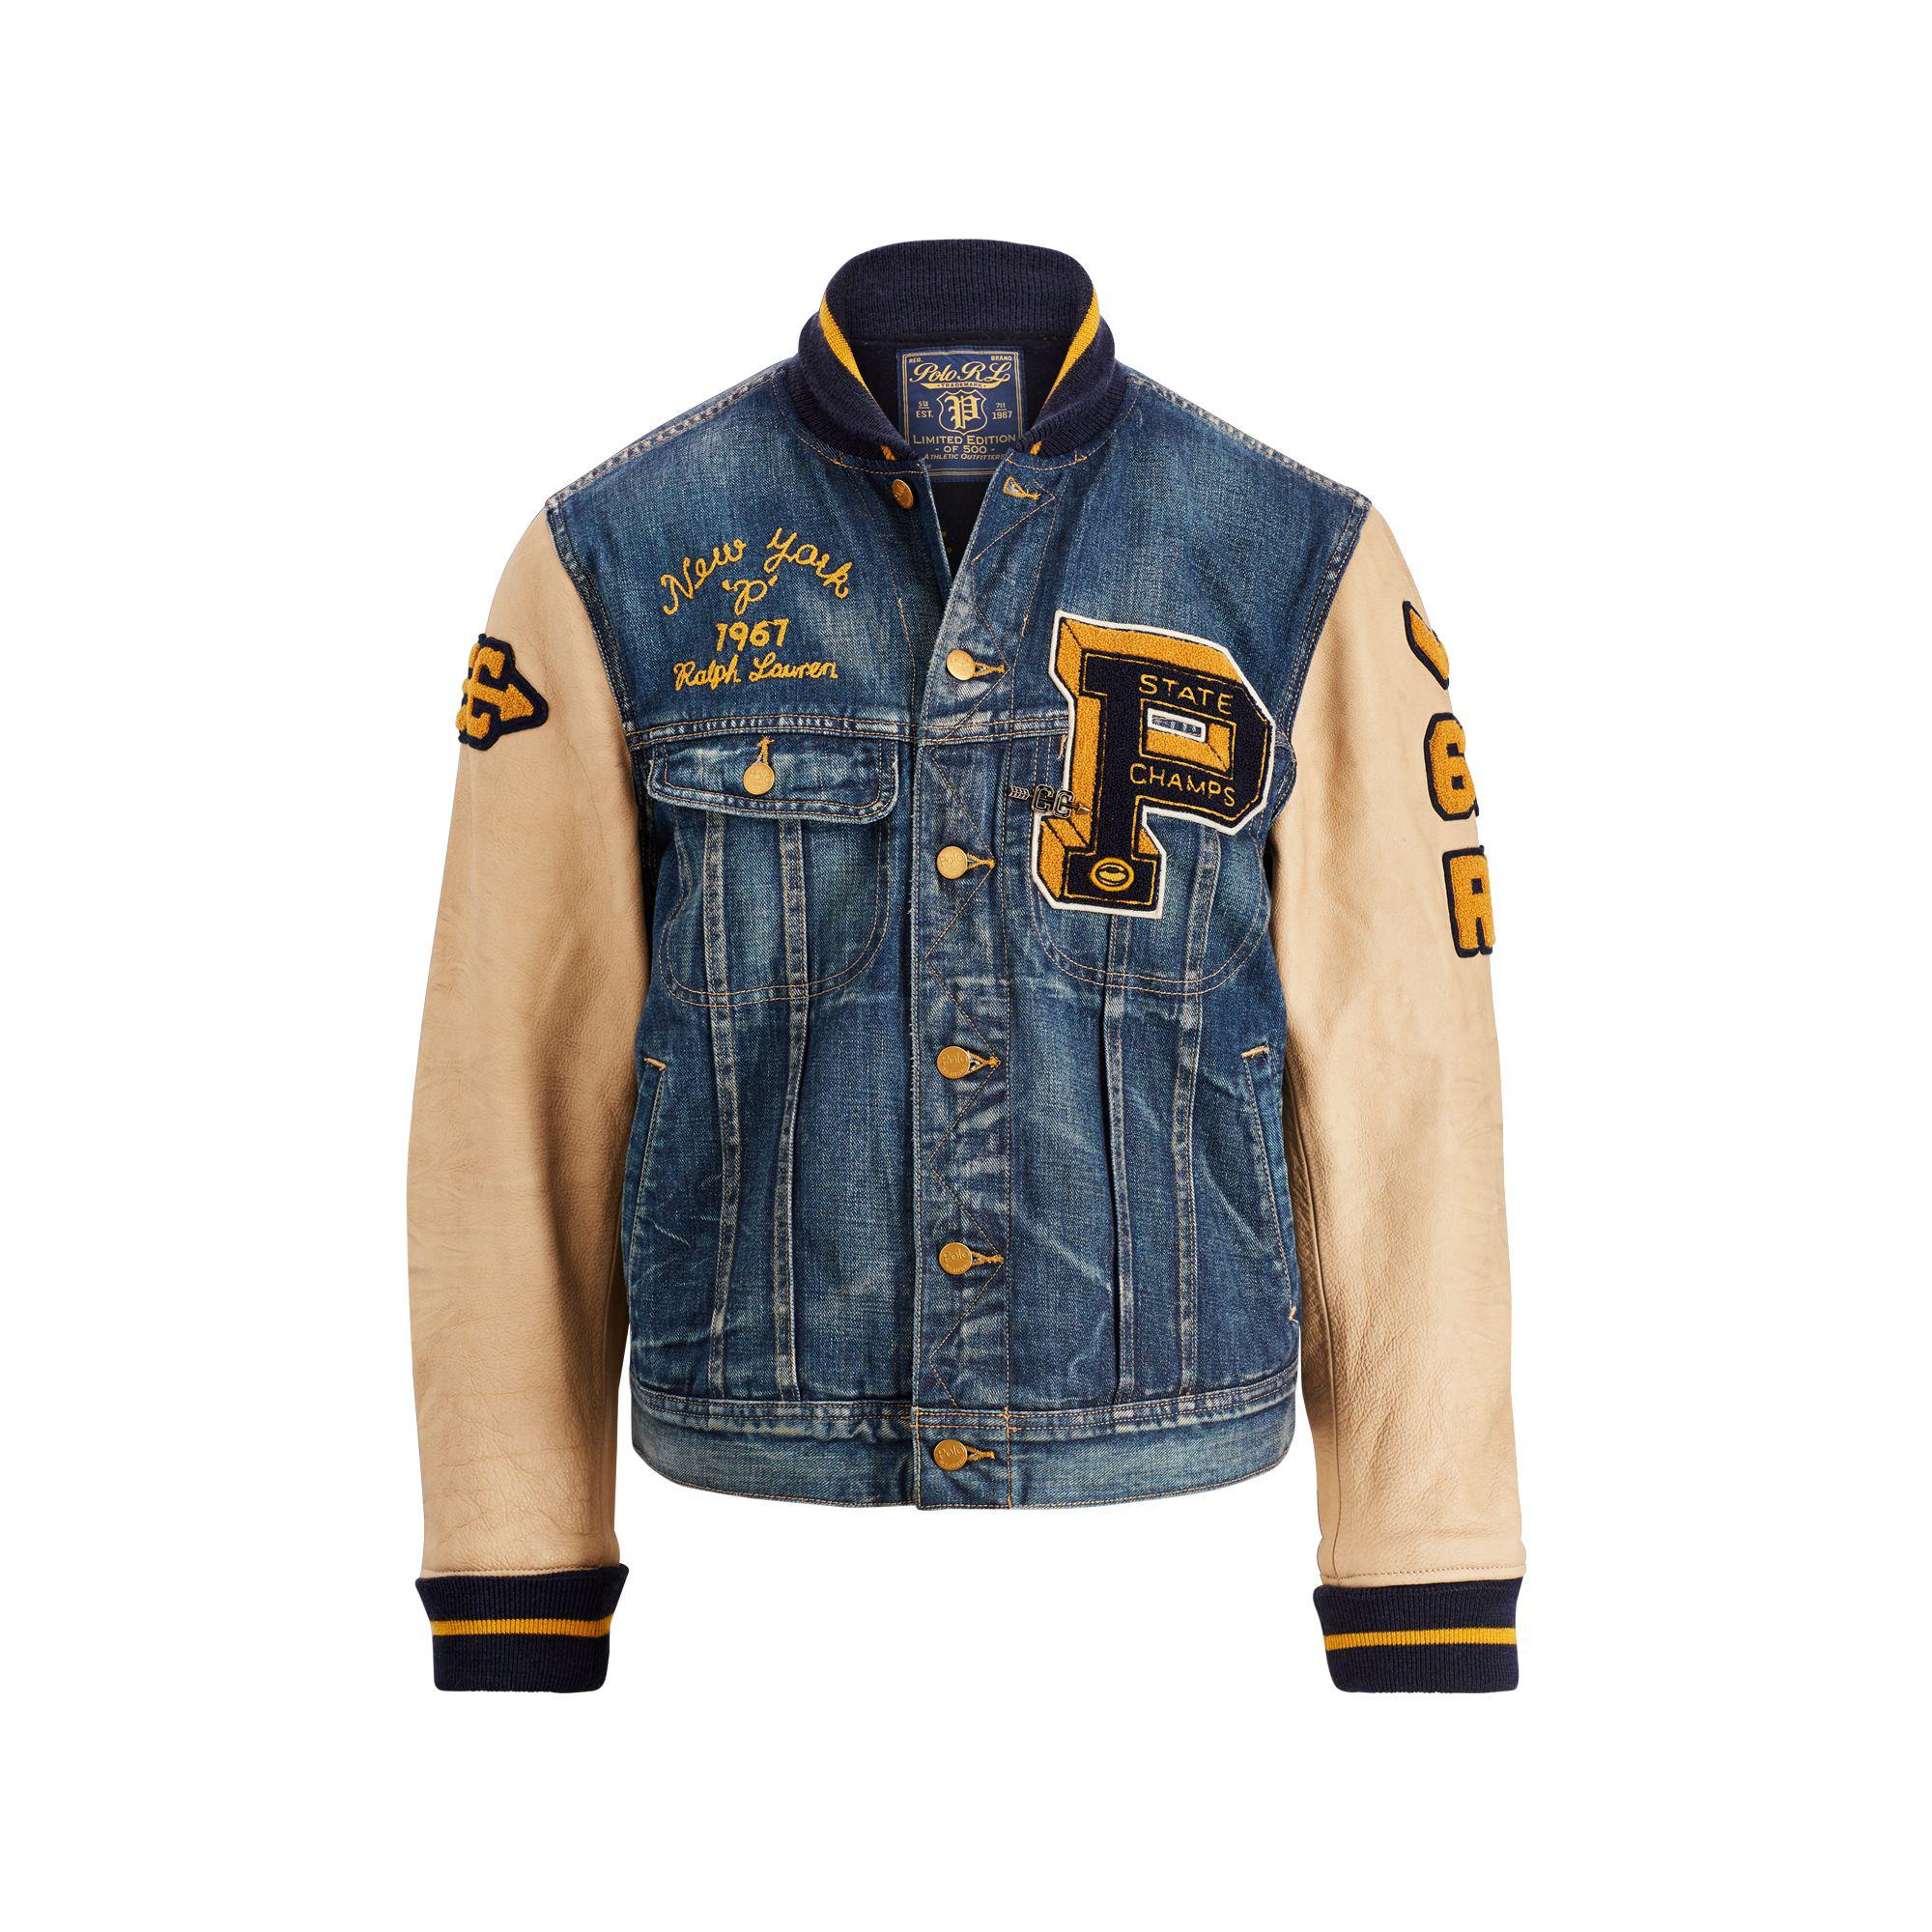 polo ralph lauren limited edition denim jacket > Up to 70% OFF > Free  shipping